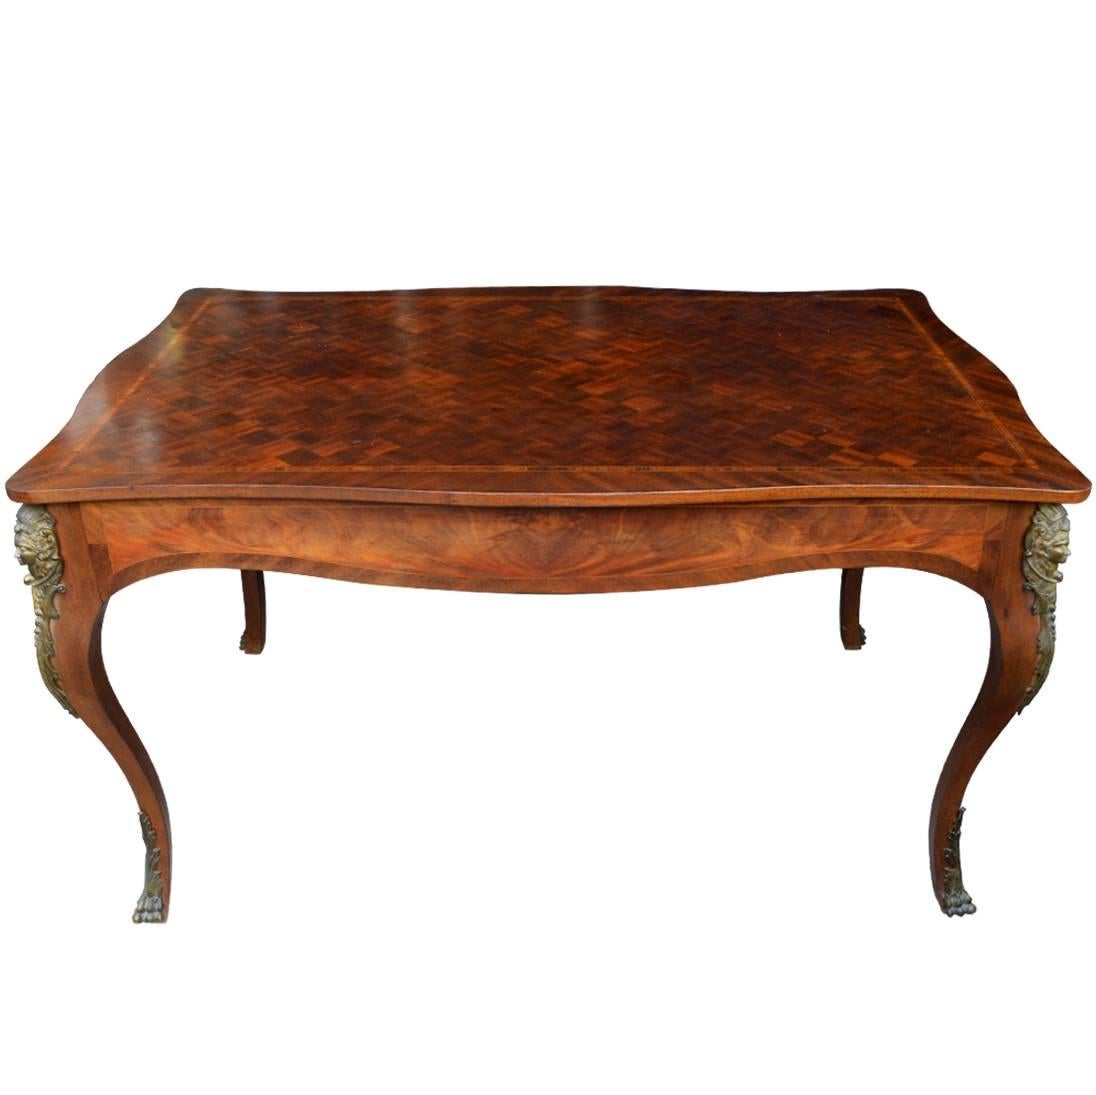 French Ormolu-Mounted Parquetry Top Table